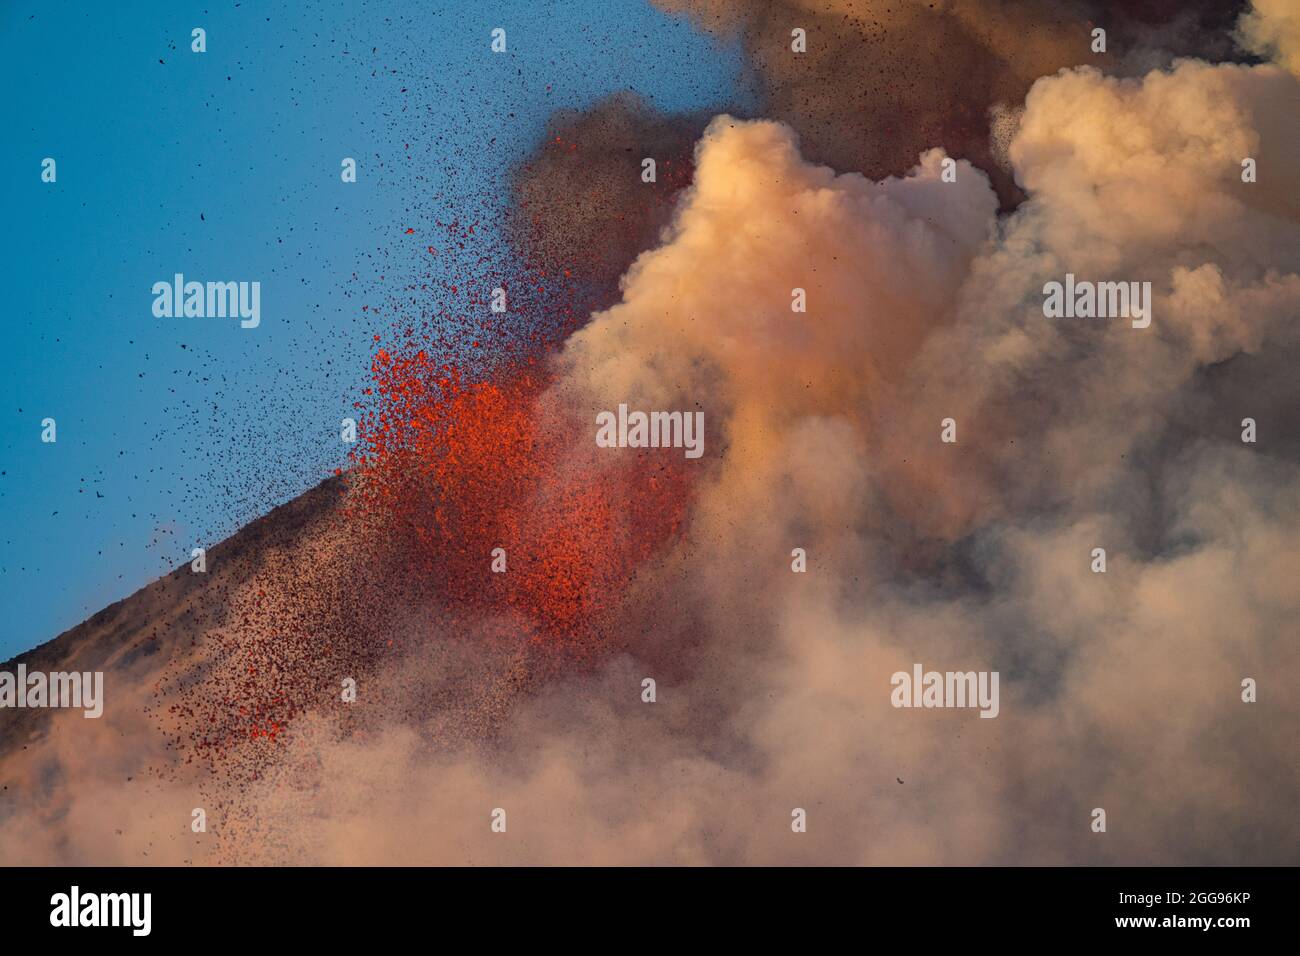 CATANIA, ETNA, ITALY - August 29, 2021: Eruption of the Etna volcano in Sicily. The eruptive column several km high was carried by the wind in an easterly direction, the ash fallout hainterested the municipalities of Milo and Zafferana Etnea and the neighboring countries. Credit: Wead/Alamy Live News Stock Photo